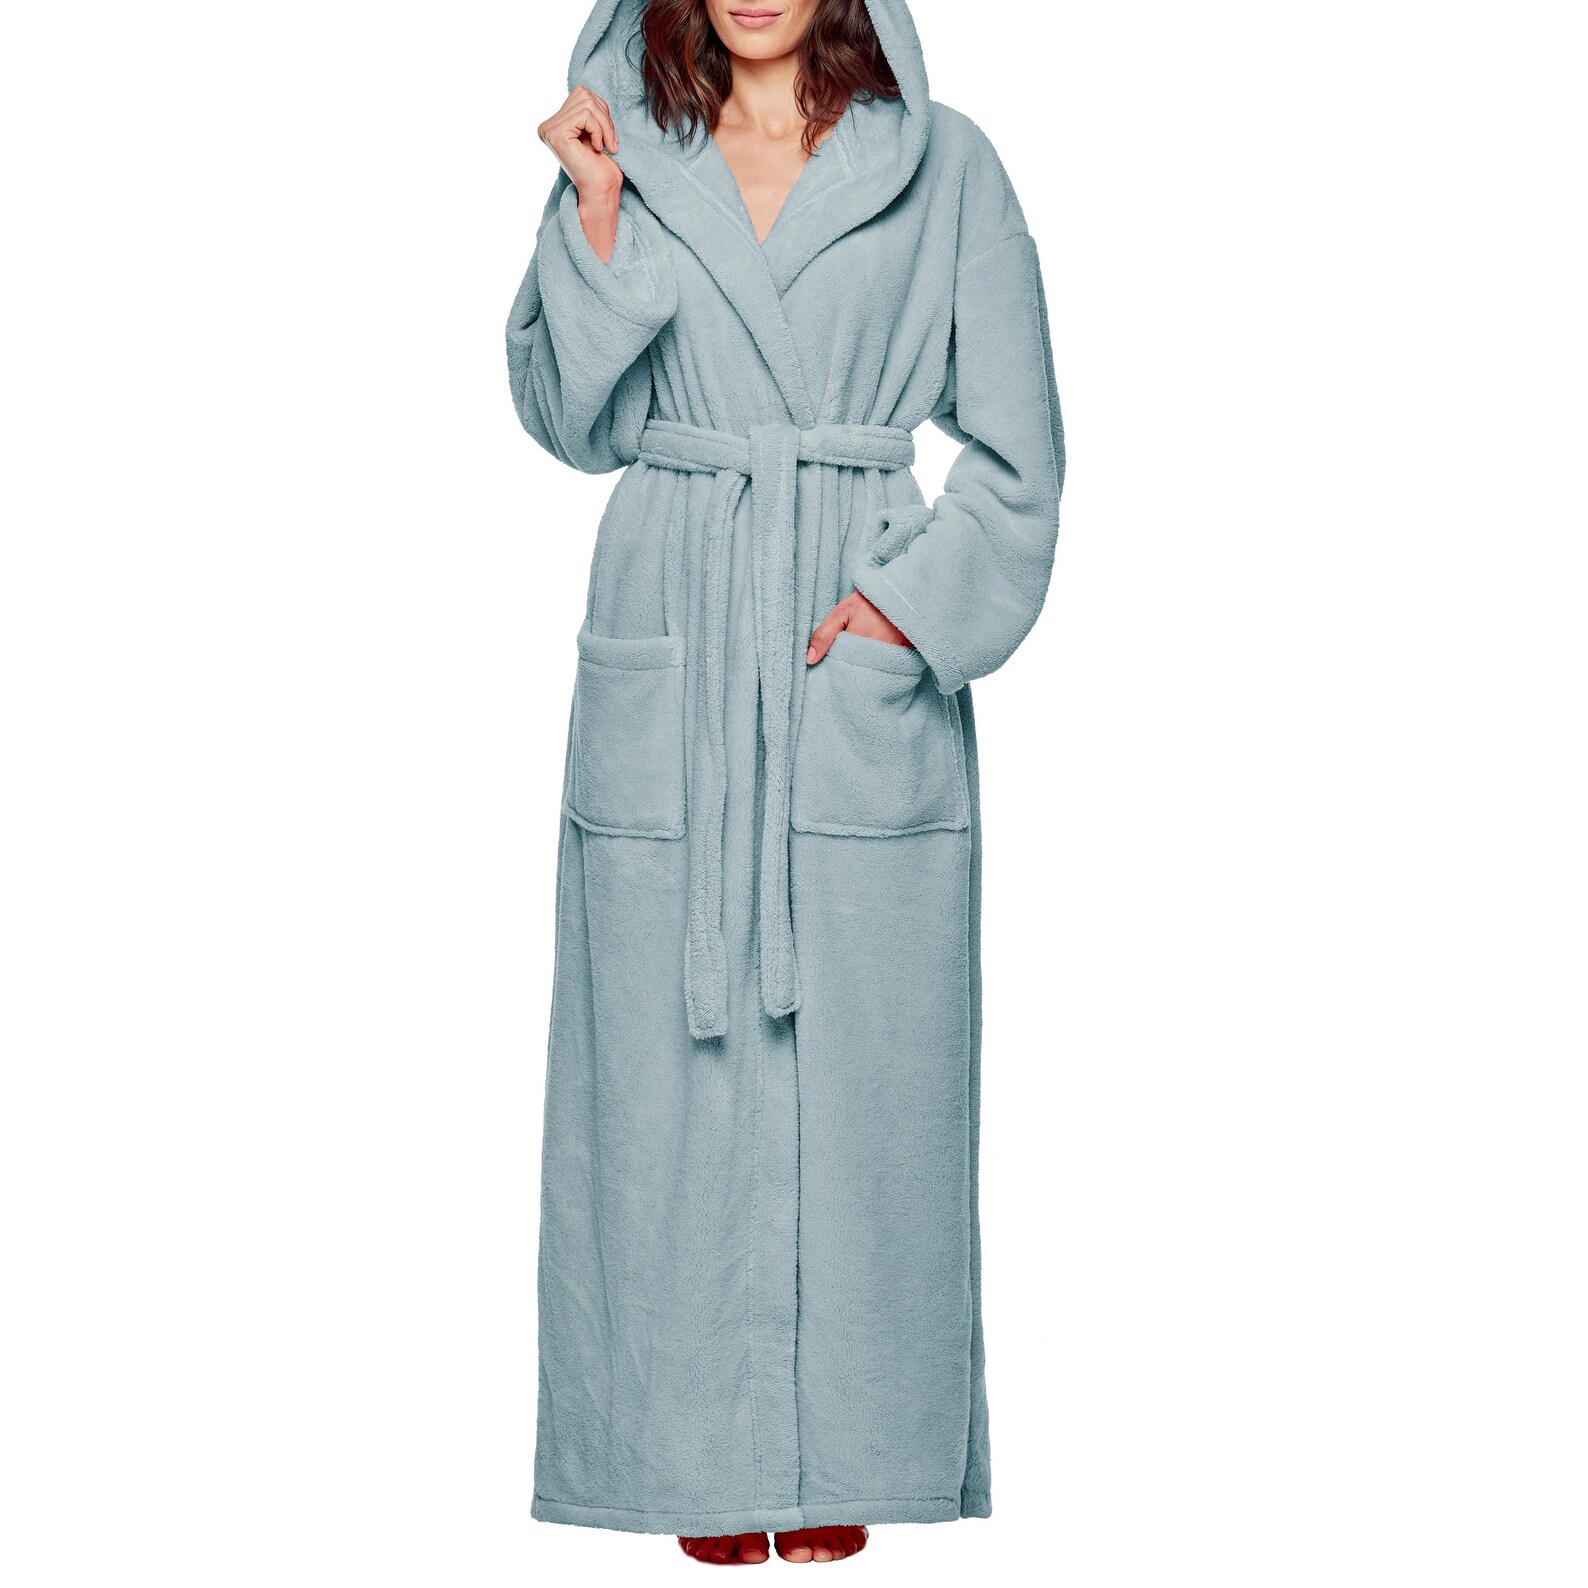 Buy Checked Hooded Blanket M, Dressing gowns